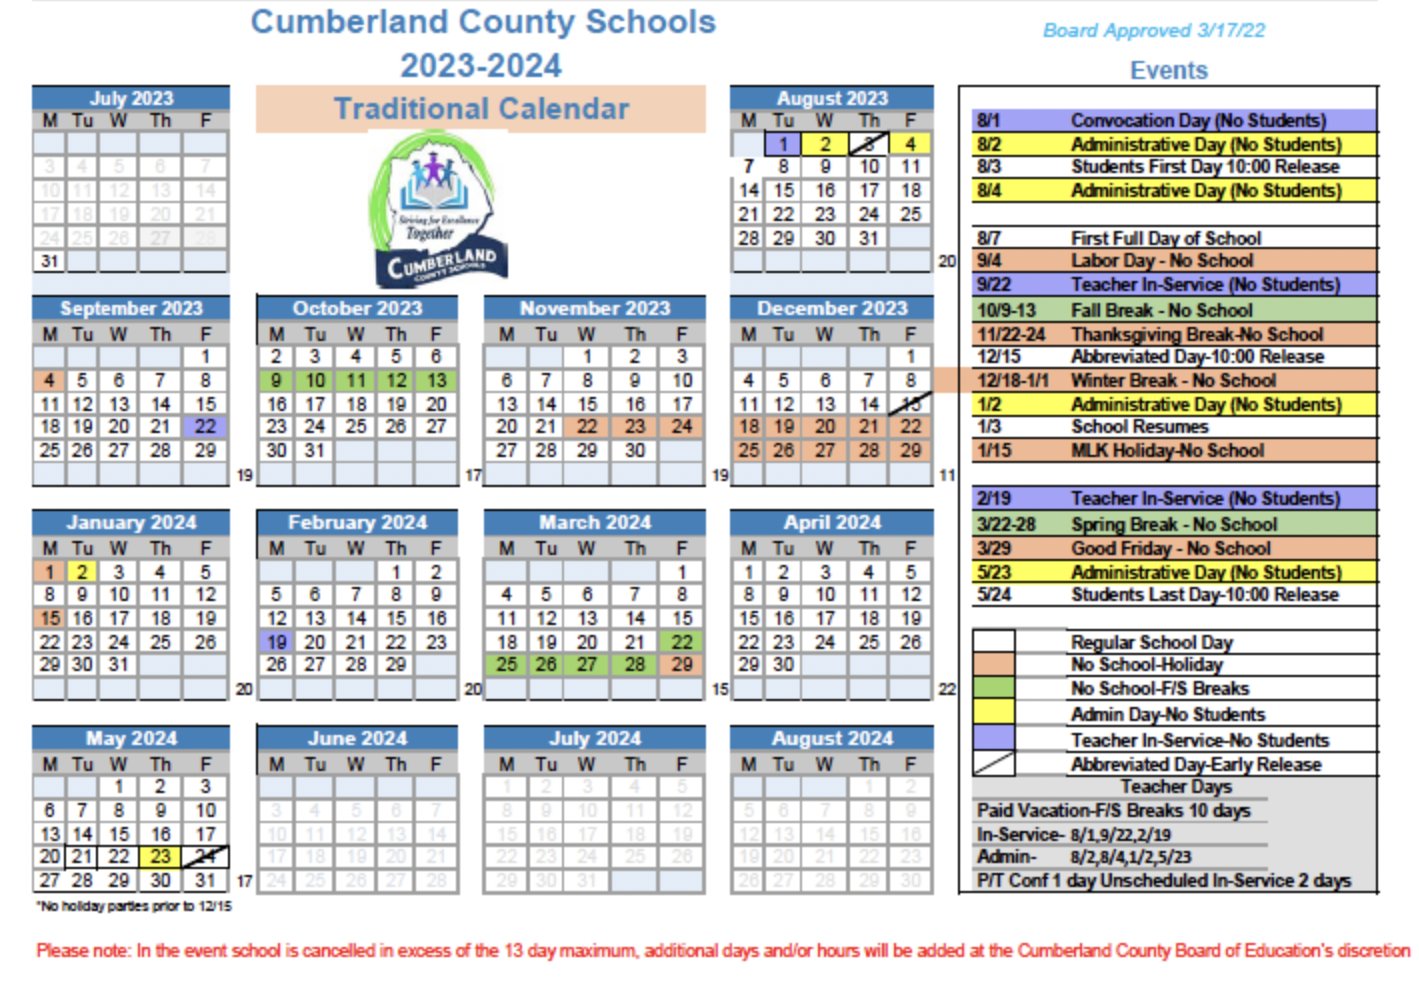 This is the 2023-2024 school calendar.